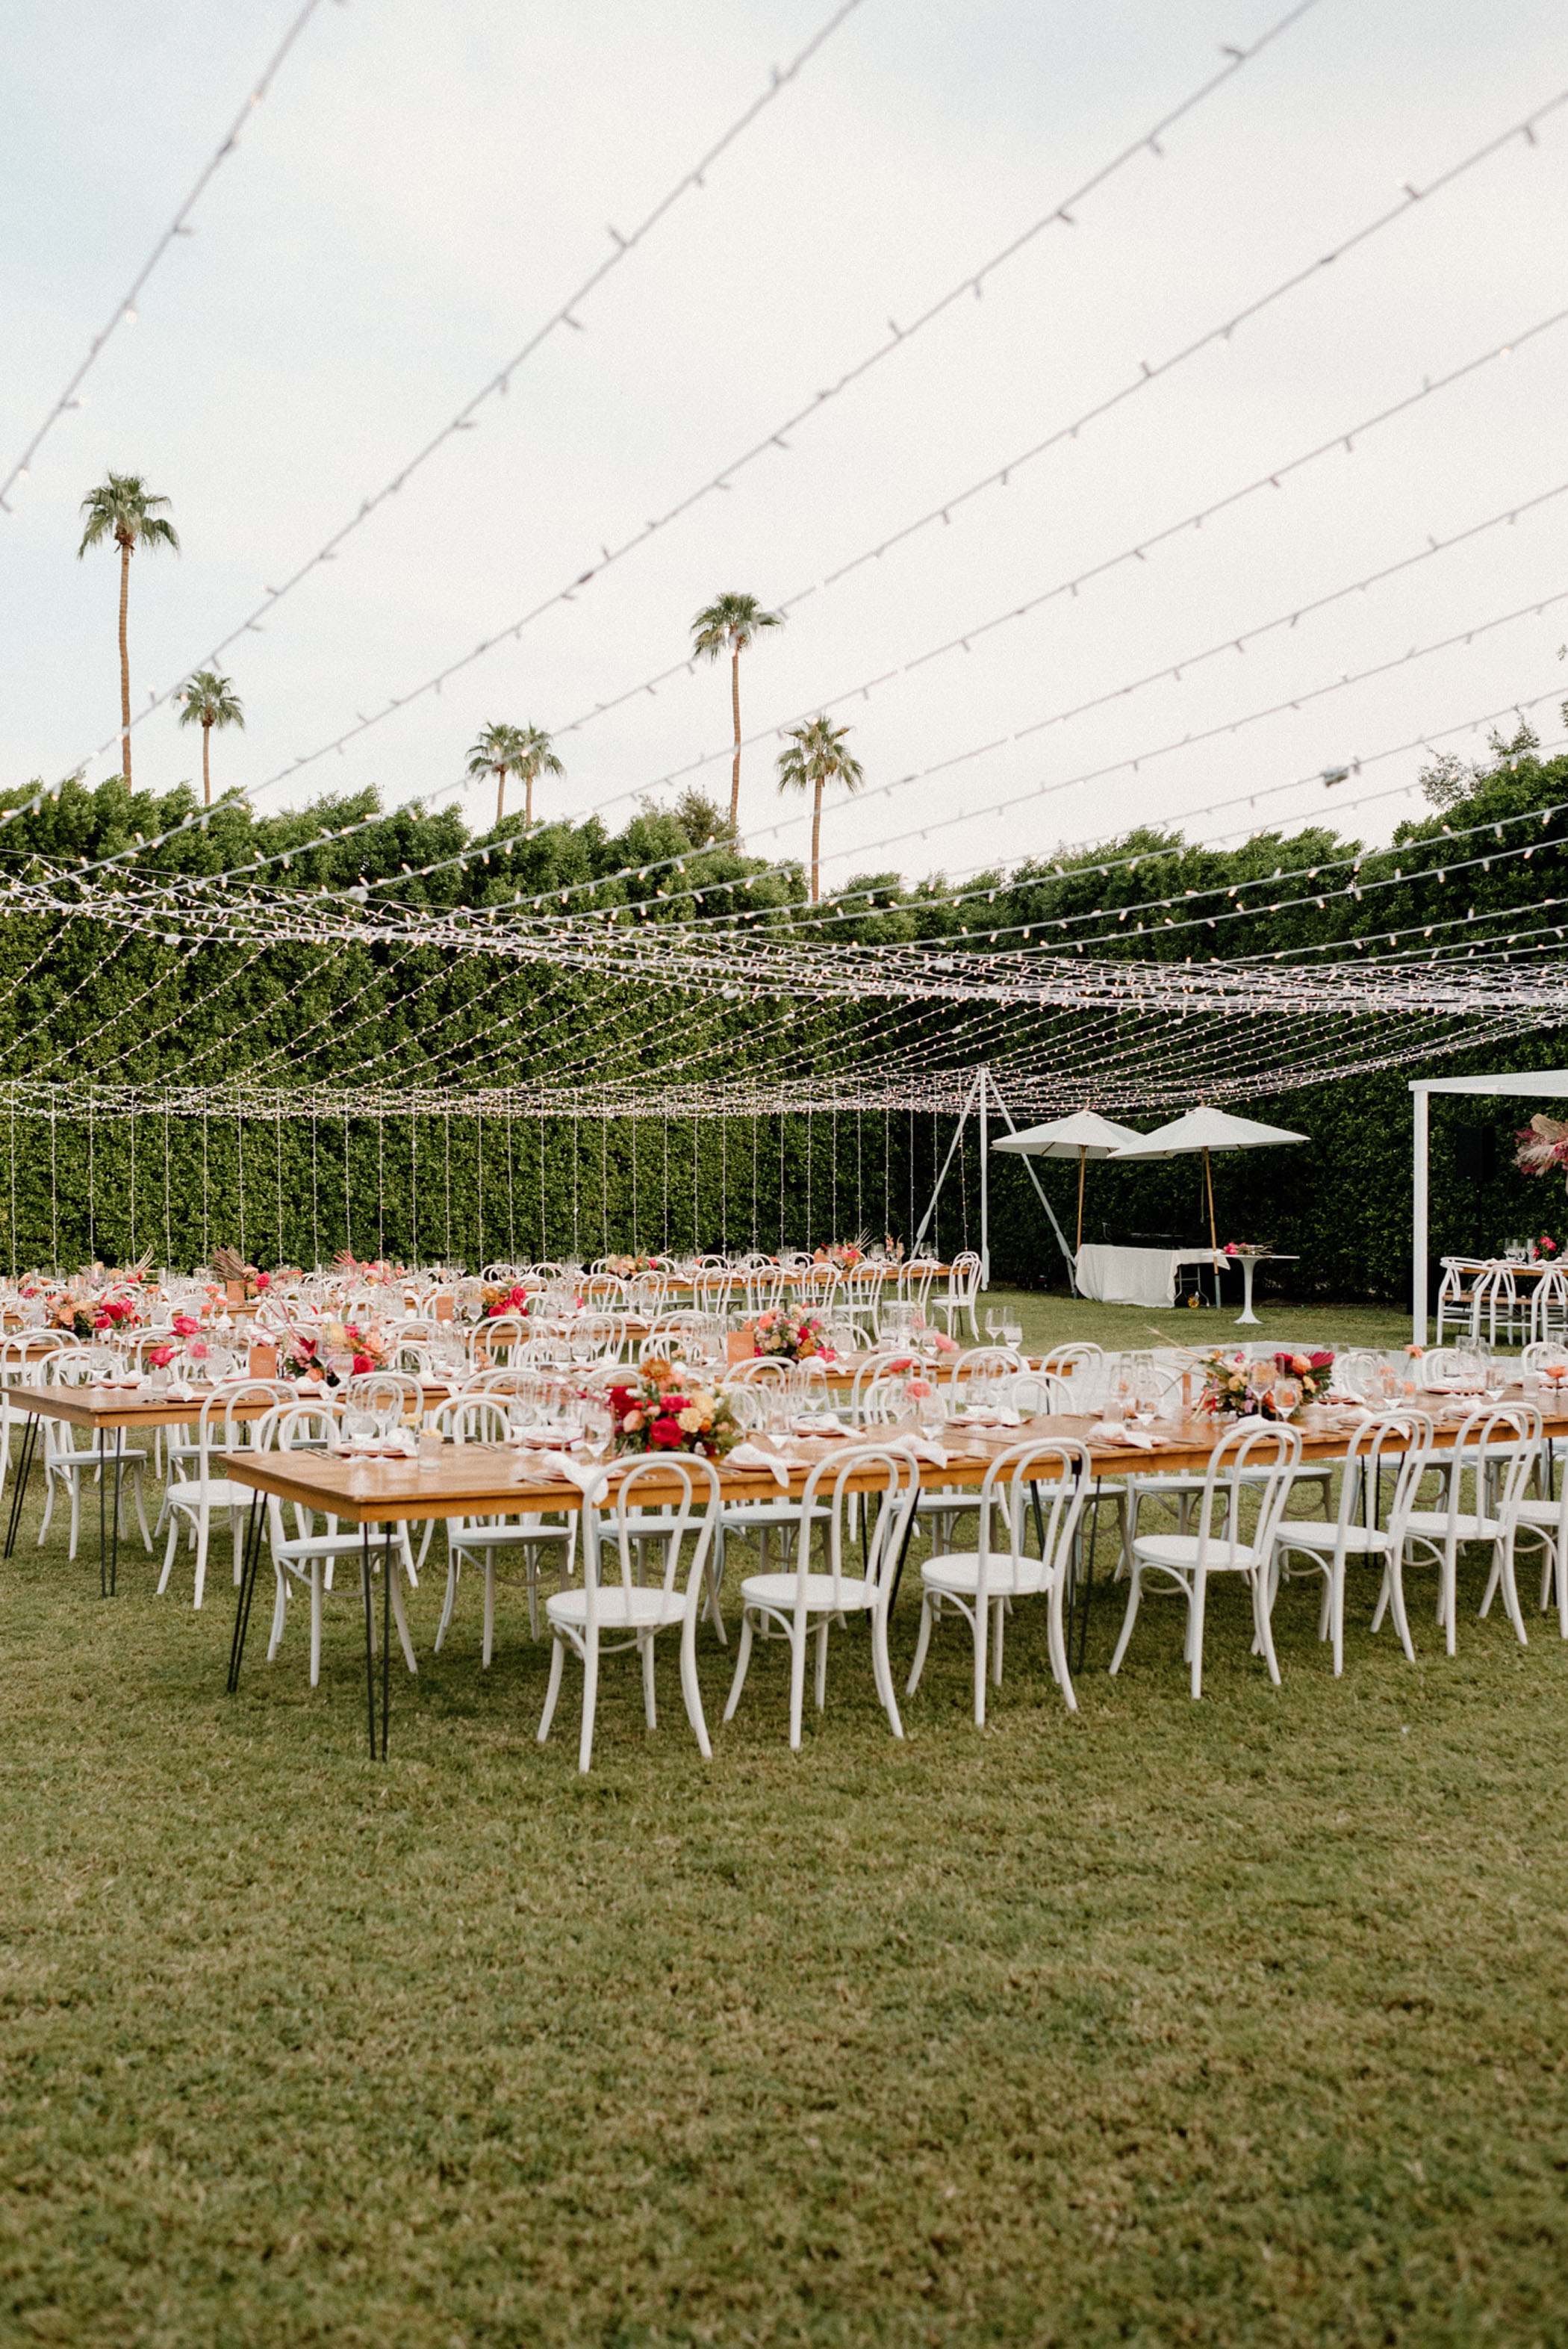 Colorful and Vibrant Palm Springs Wedding Reception Decor Lights Tent